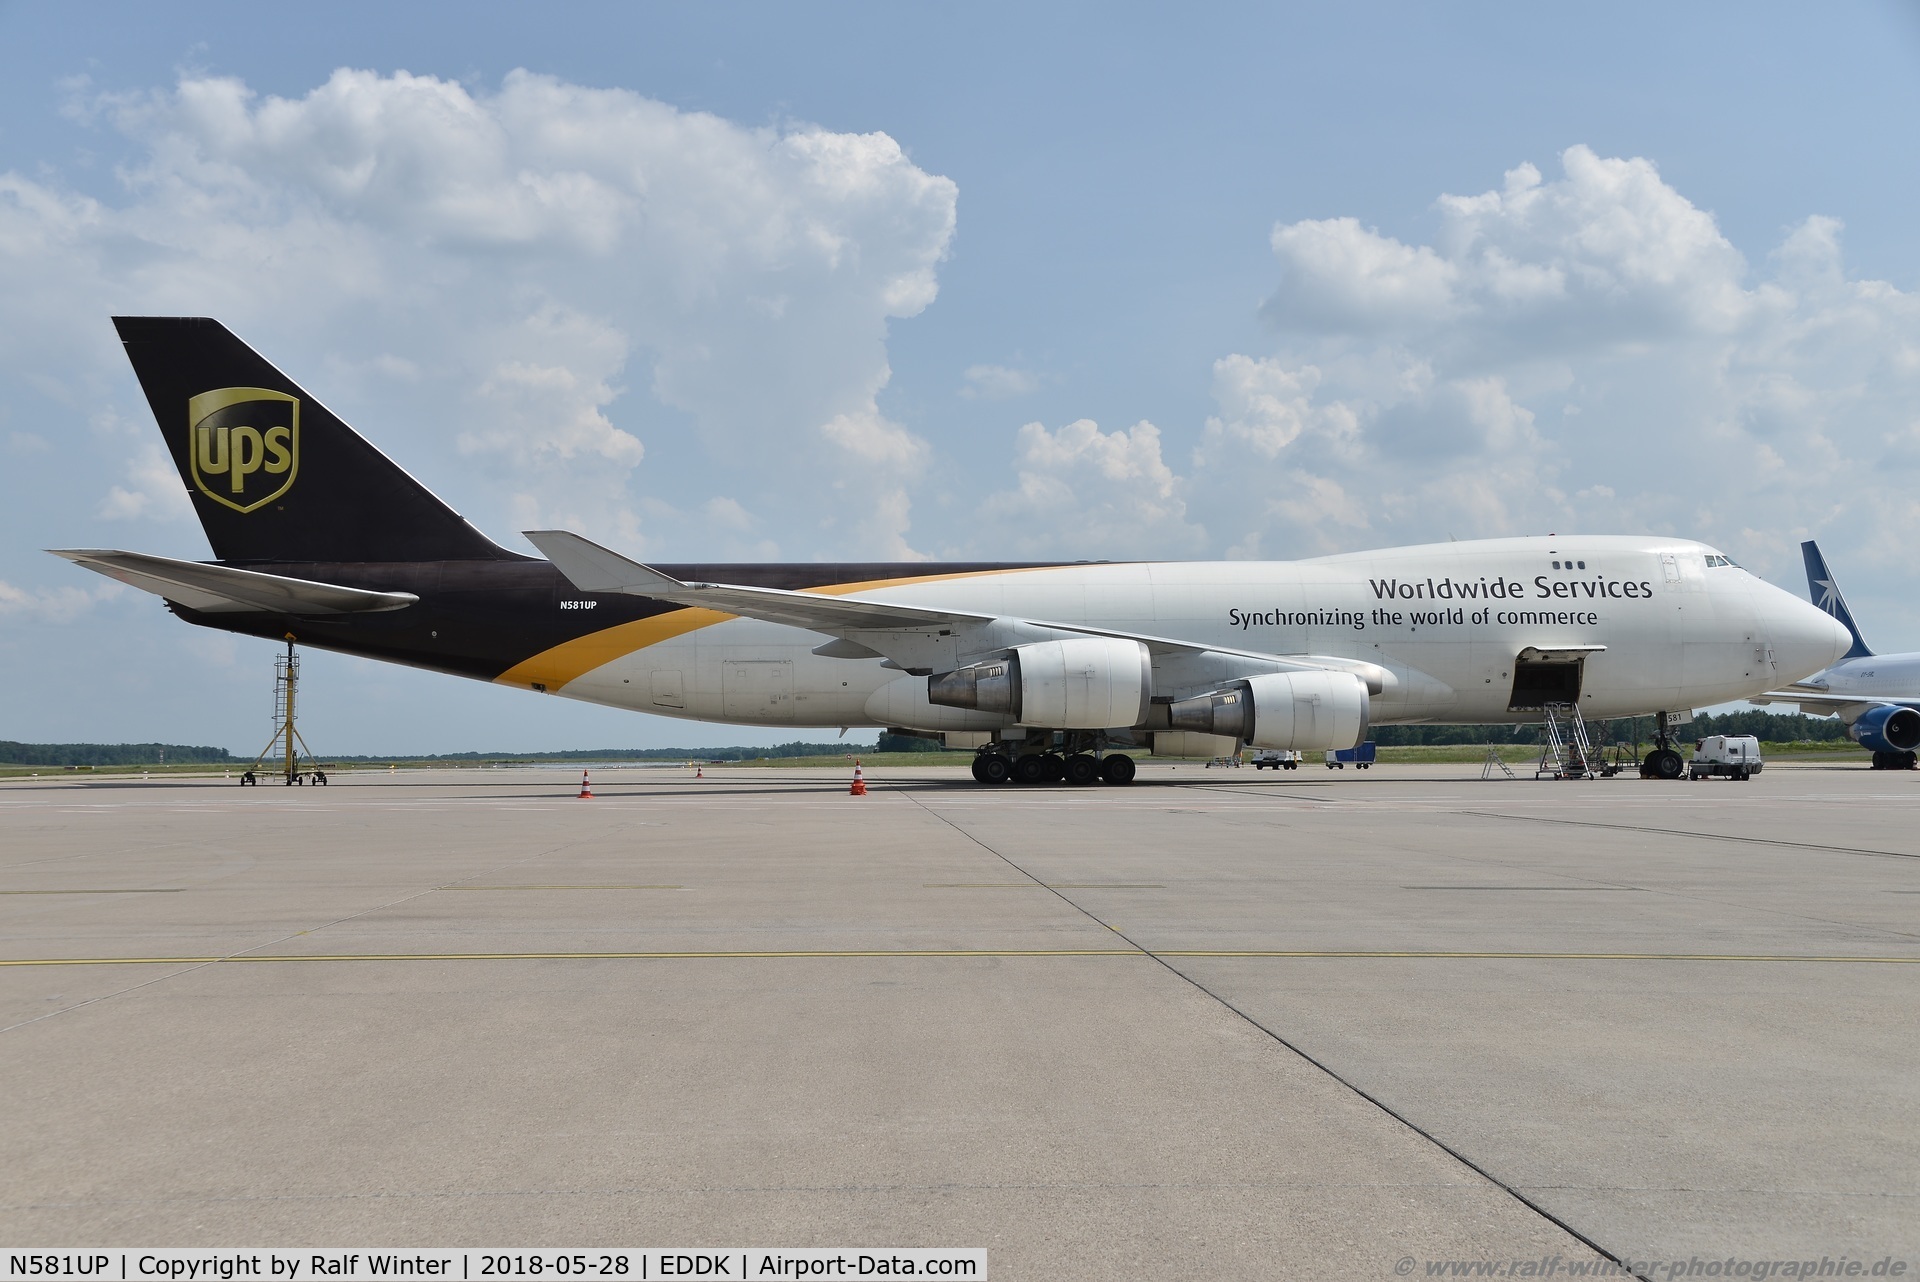 N581UP, 1993 Boeing 747-4R7F C/N 25866, Boeing 747-4R7F - 5X UPS United Parcel Service - 25866 - N581UP - 28.05.2018 - CGN